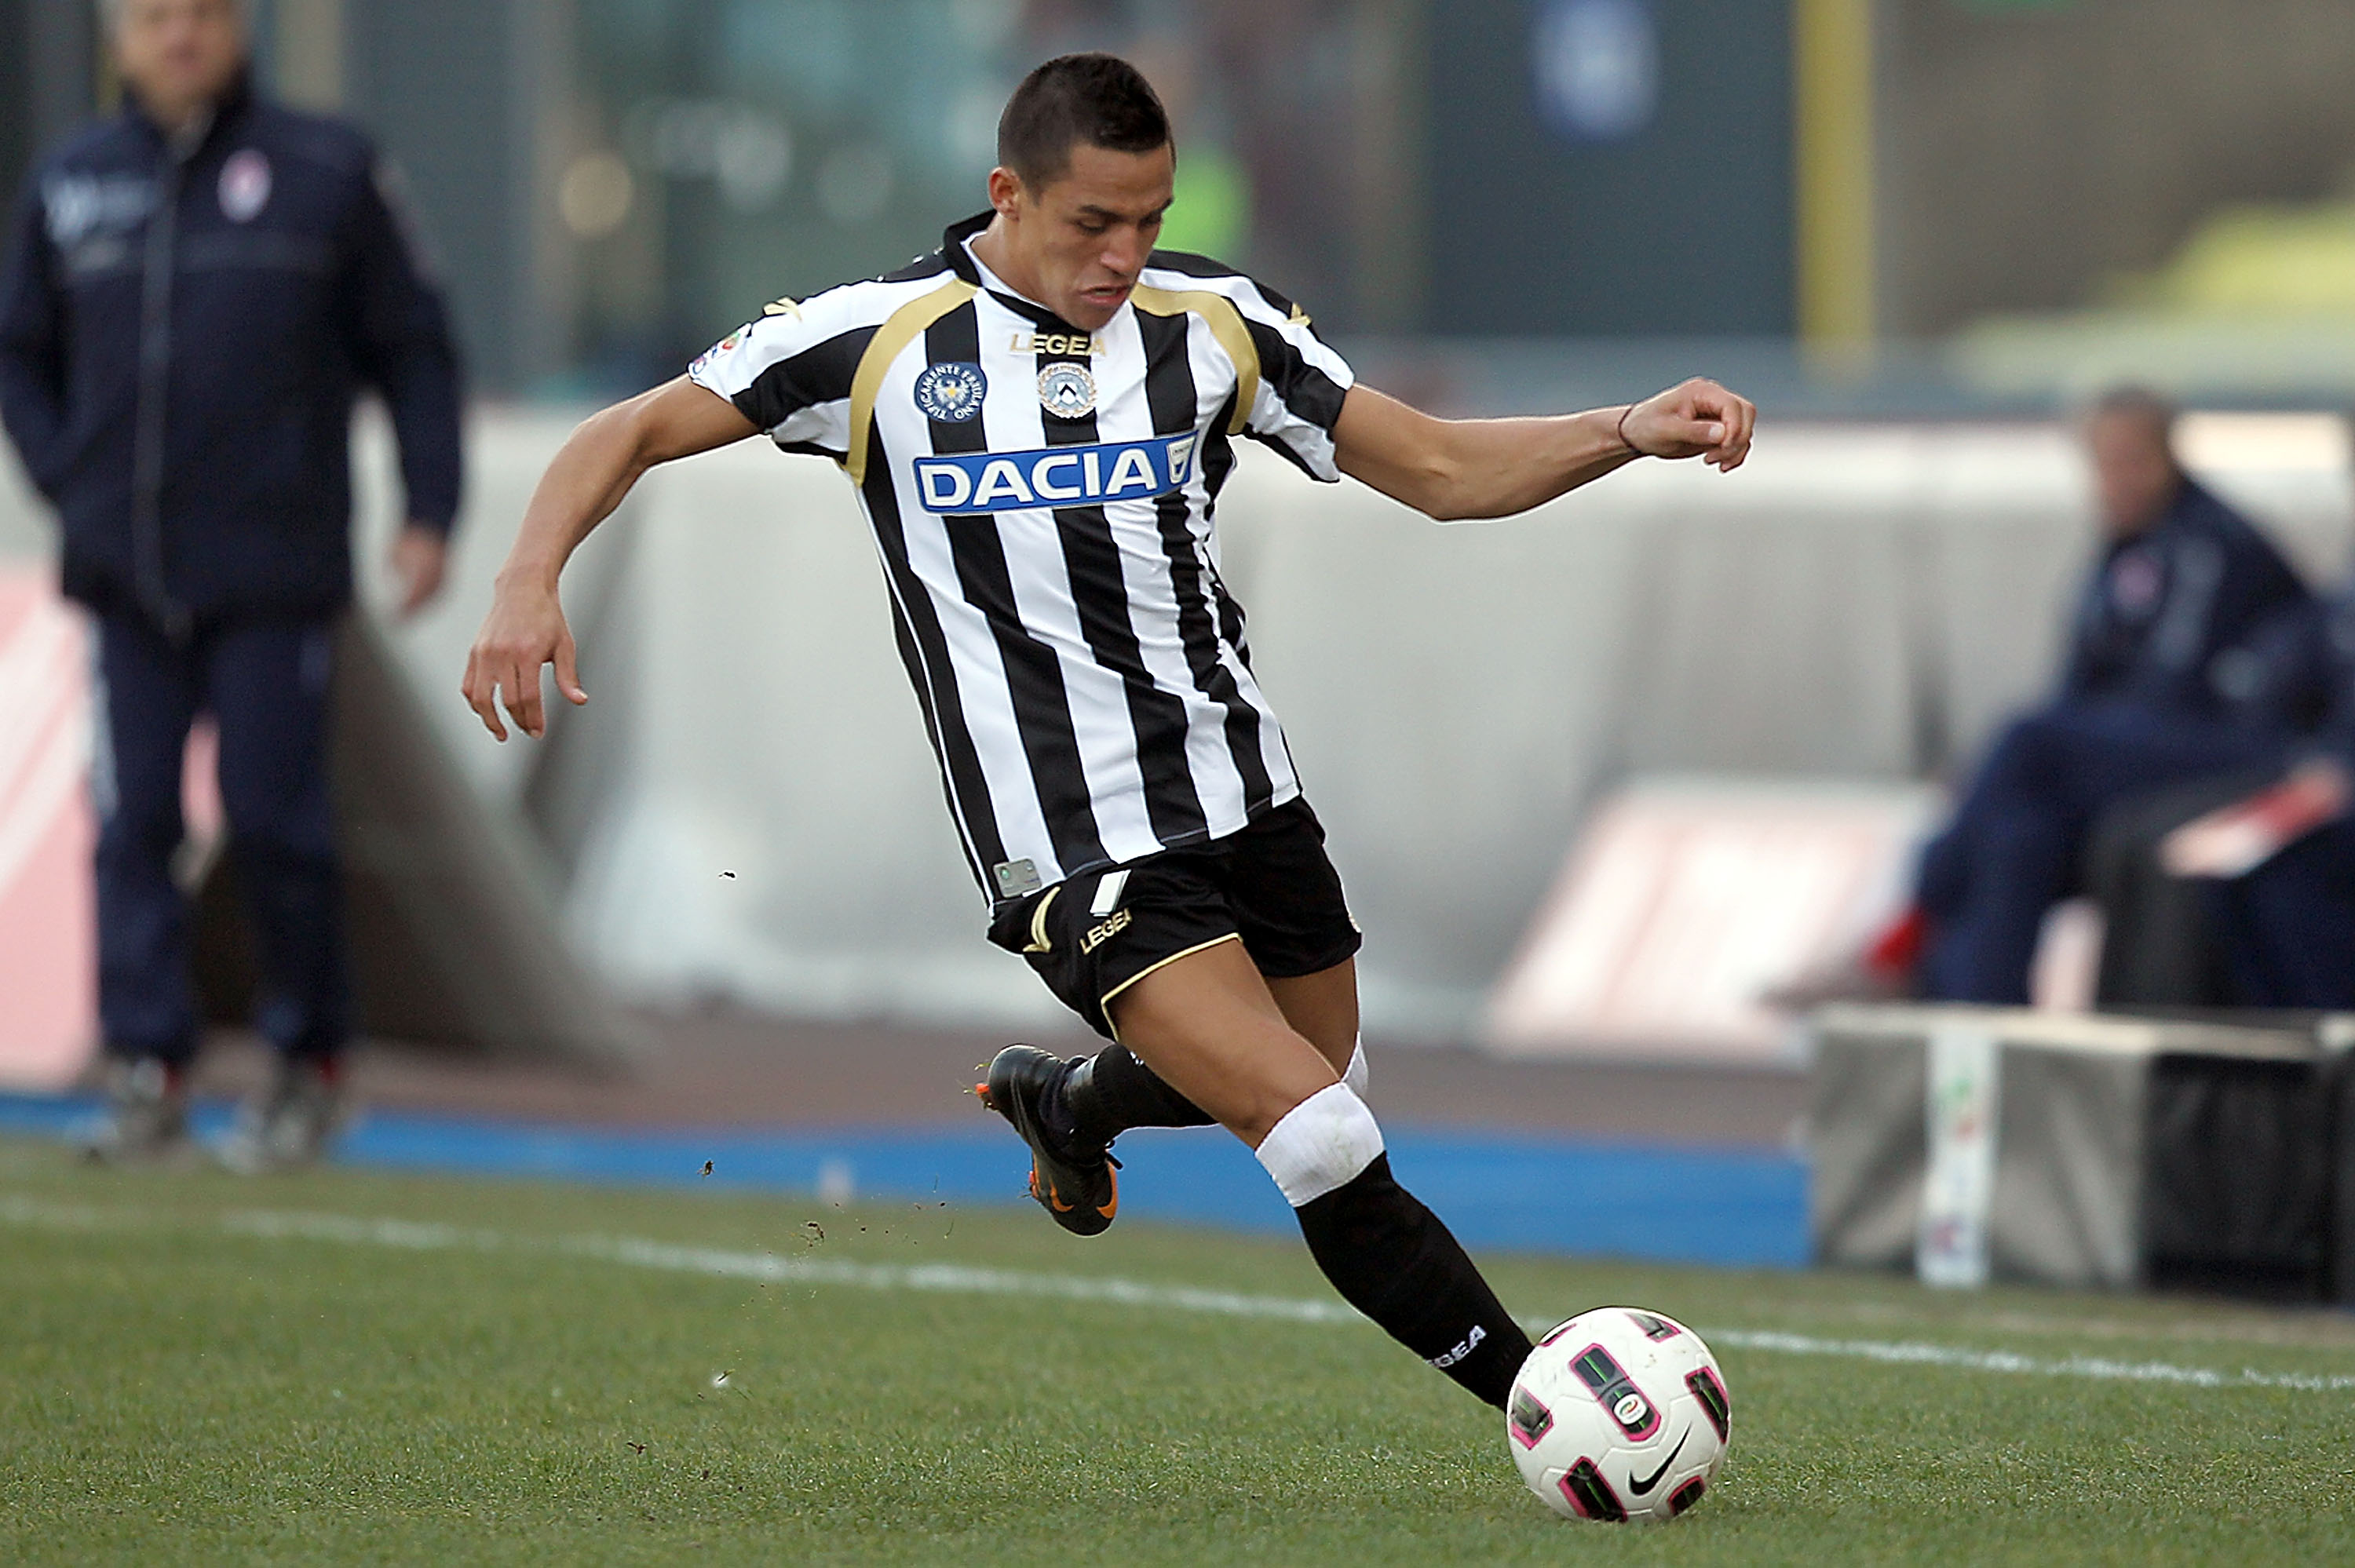 UDINE, ITALY - MARCH 06: Alexis Sanchez of Udinese Calcio in action during the Serie A match between Udinese Calcio and AS Bari at Stadio Friuli on March 6, 2011 in Udine, Italy.  (Photo by Gabriele Maltinti/Getty Images)